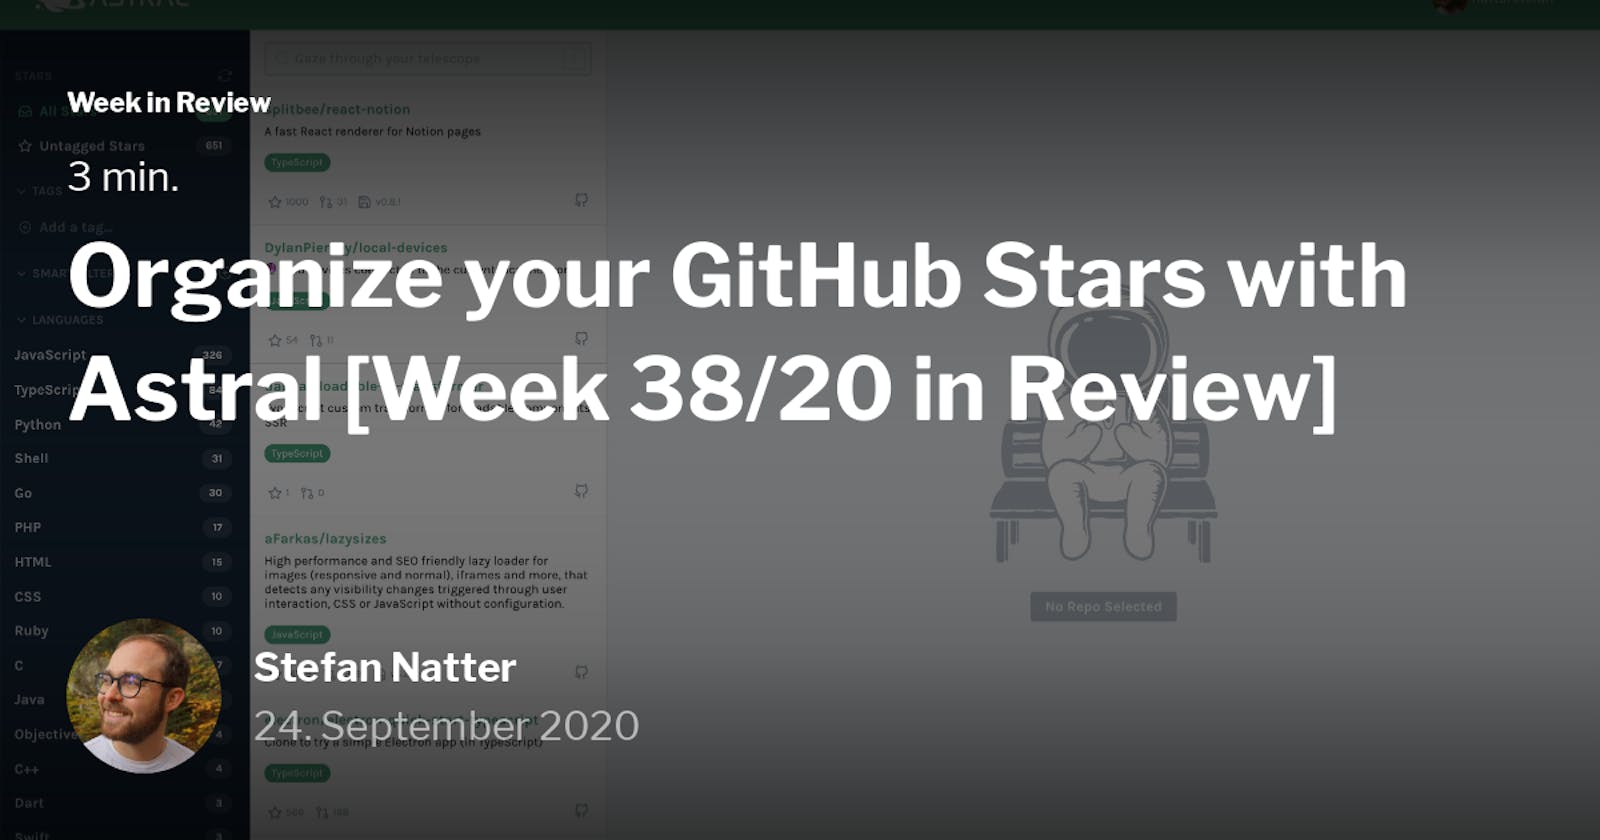 Organize your GitHub Stars with Astral  [Week 38/20 in Review]